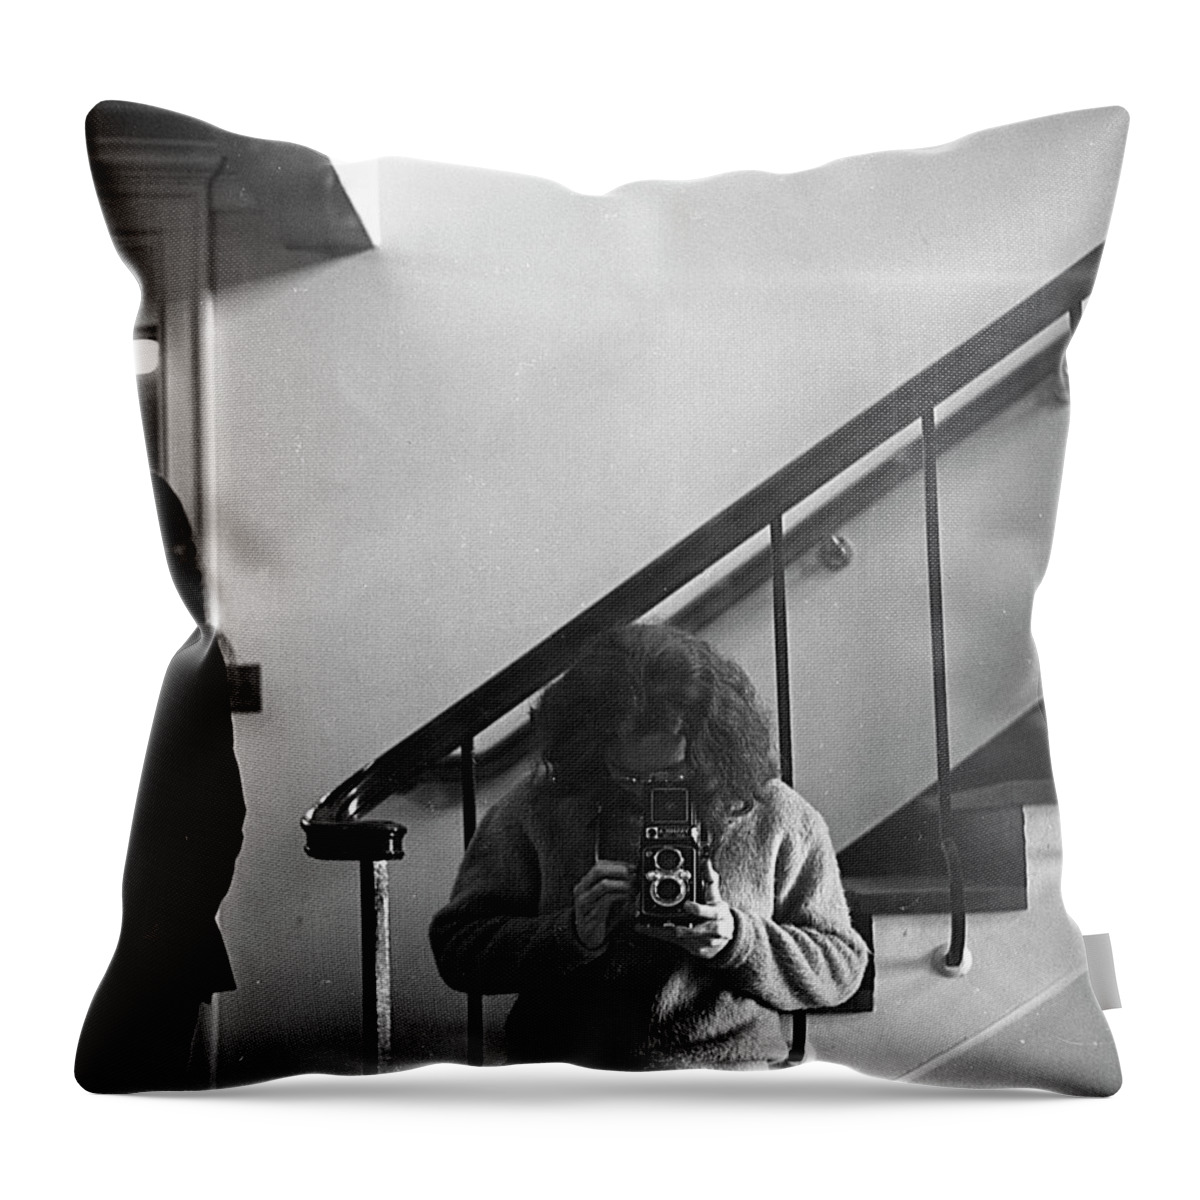 Brown University Throw Pillow featuring the photograph Self-portrait, With Woman, In Mirror, Cropped, 1972 by Jeremy Butler